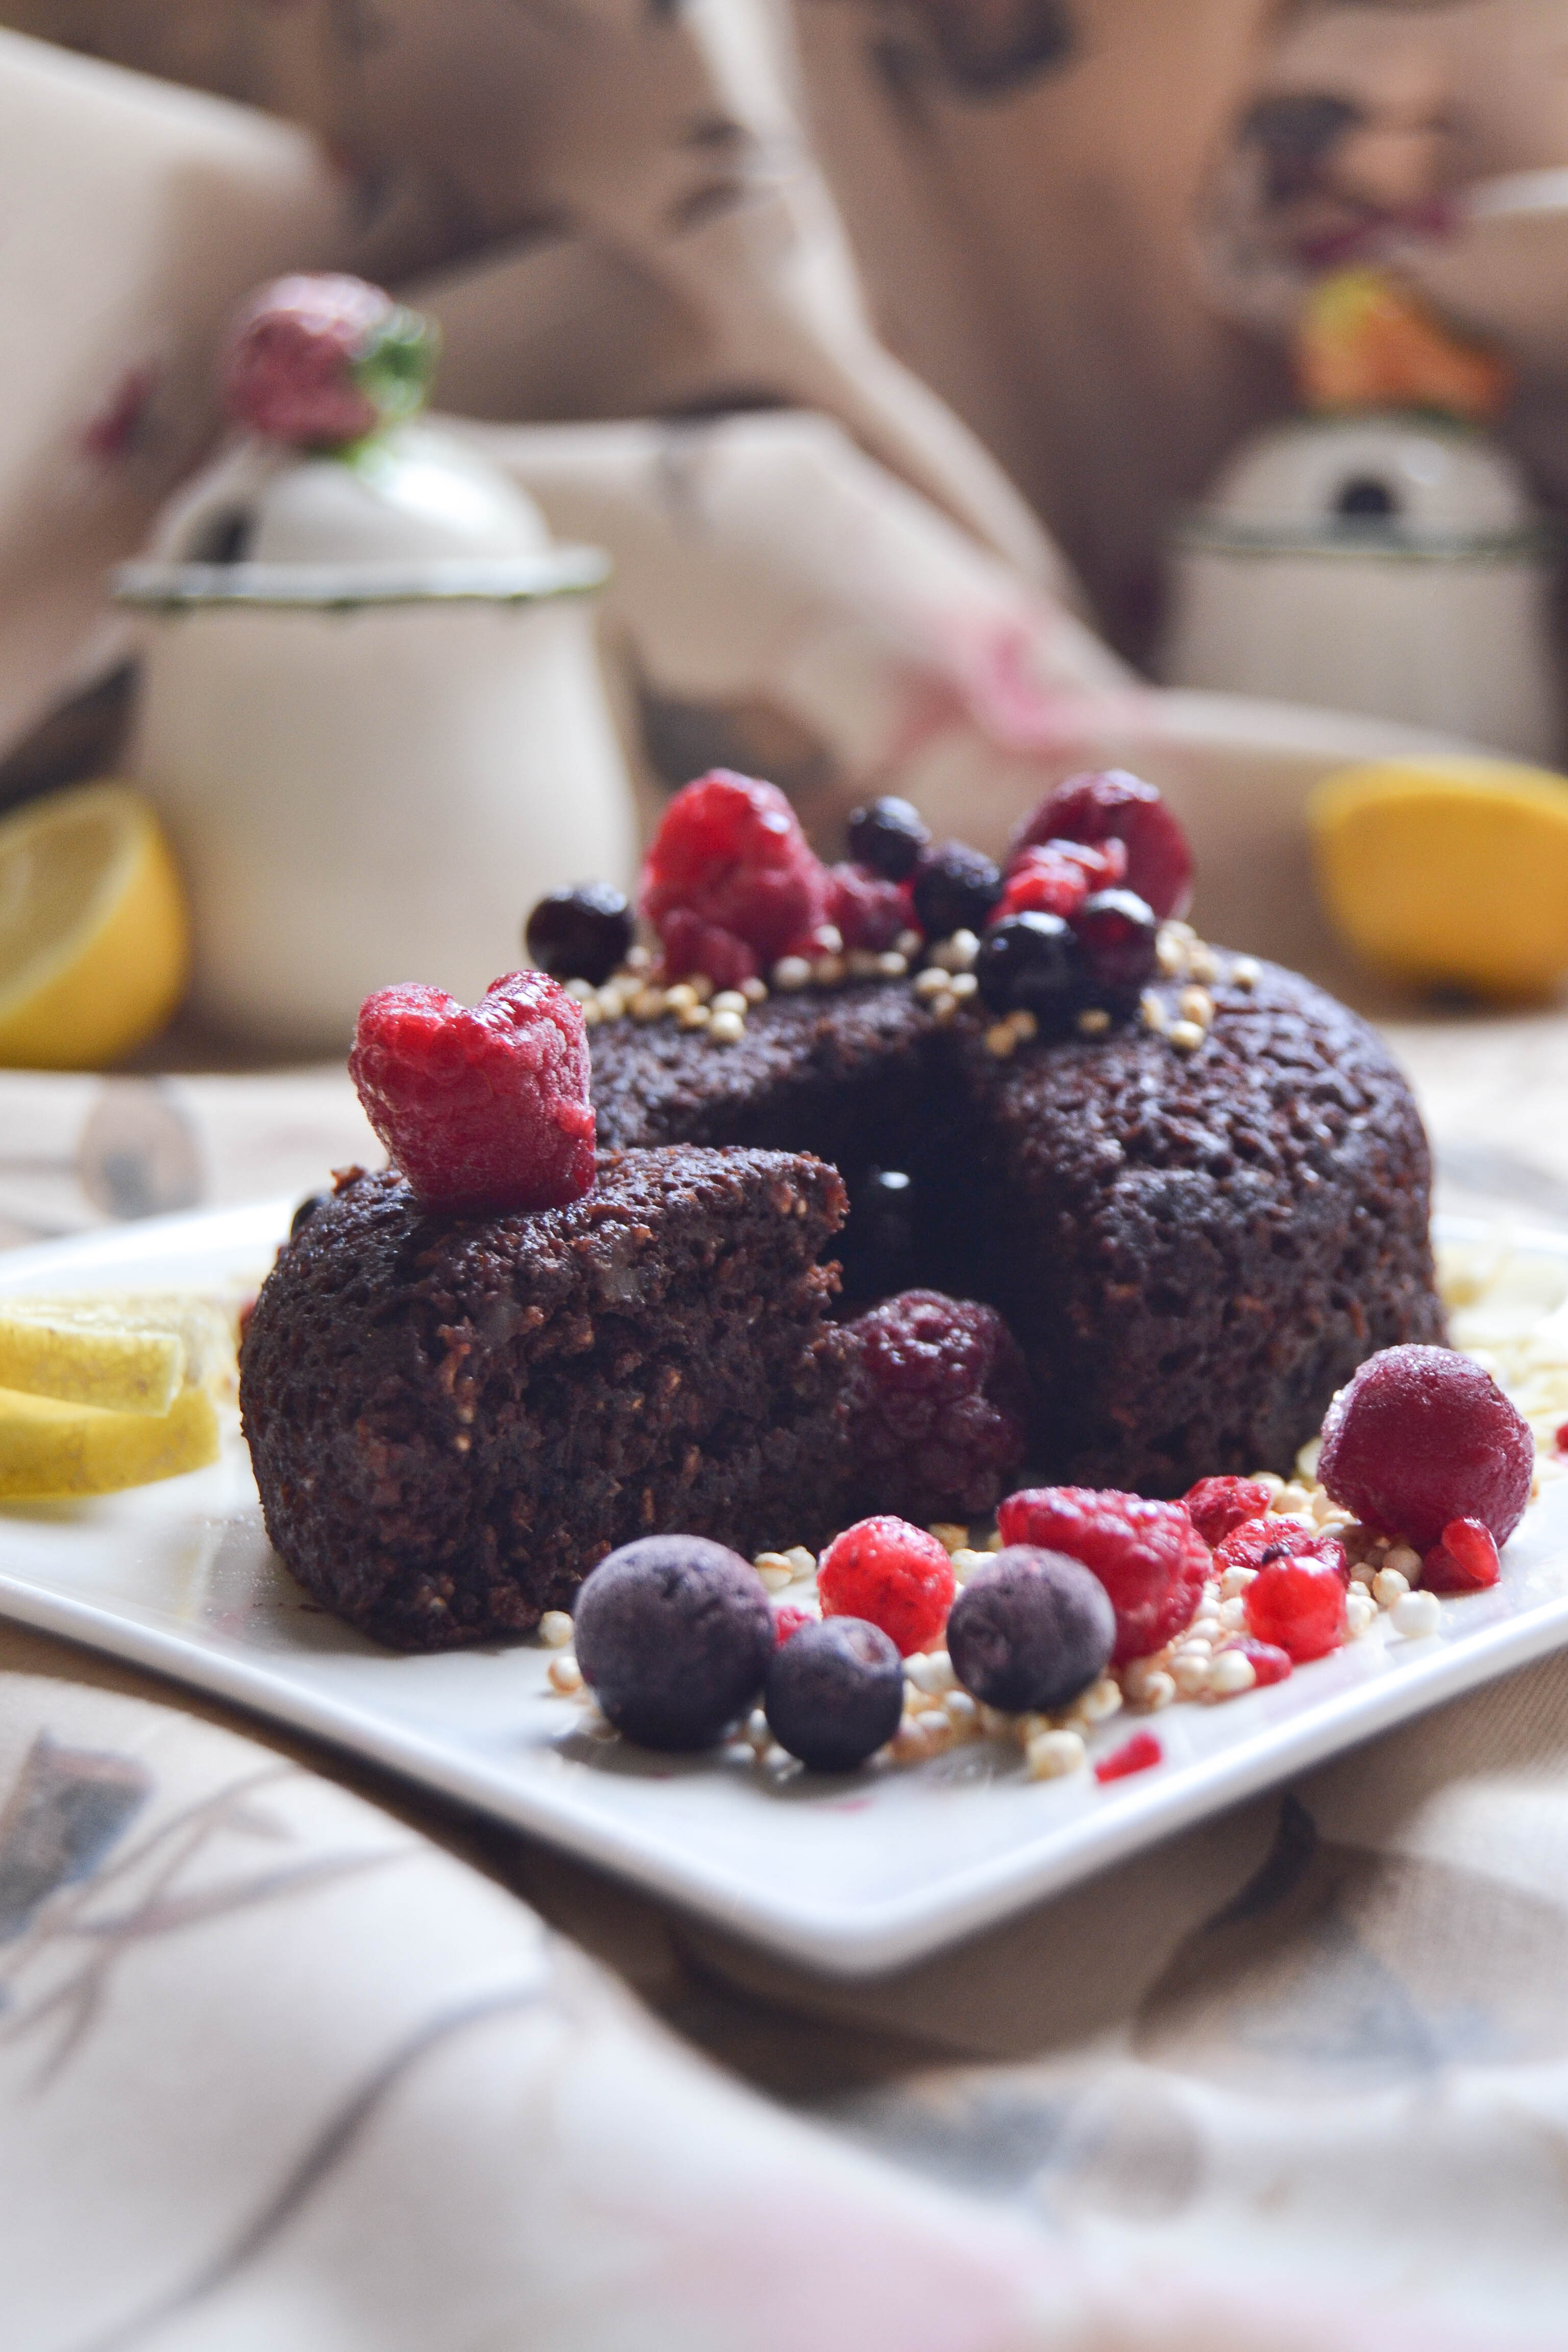 delicious chocolate mugcake with berries